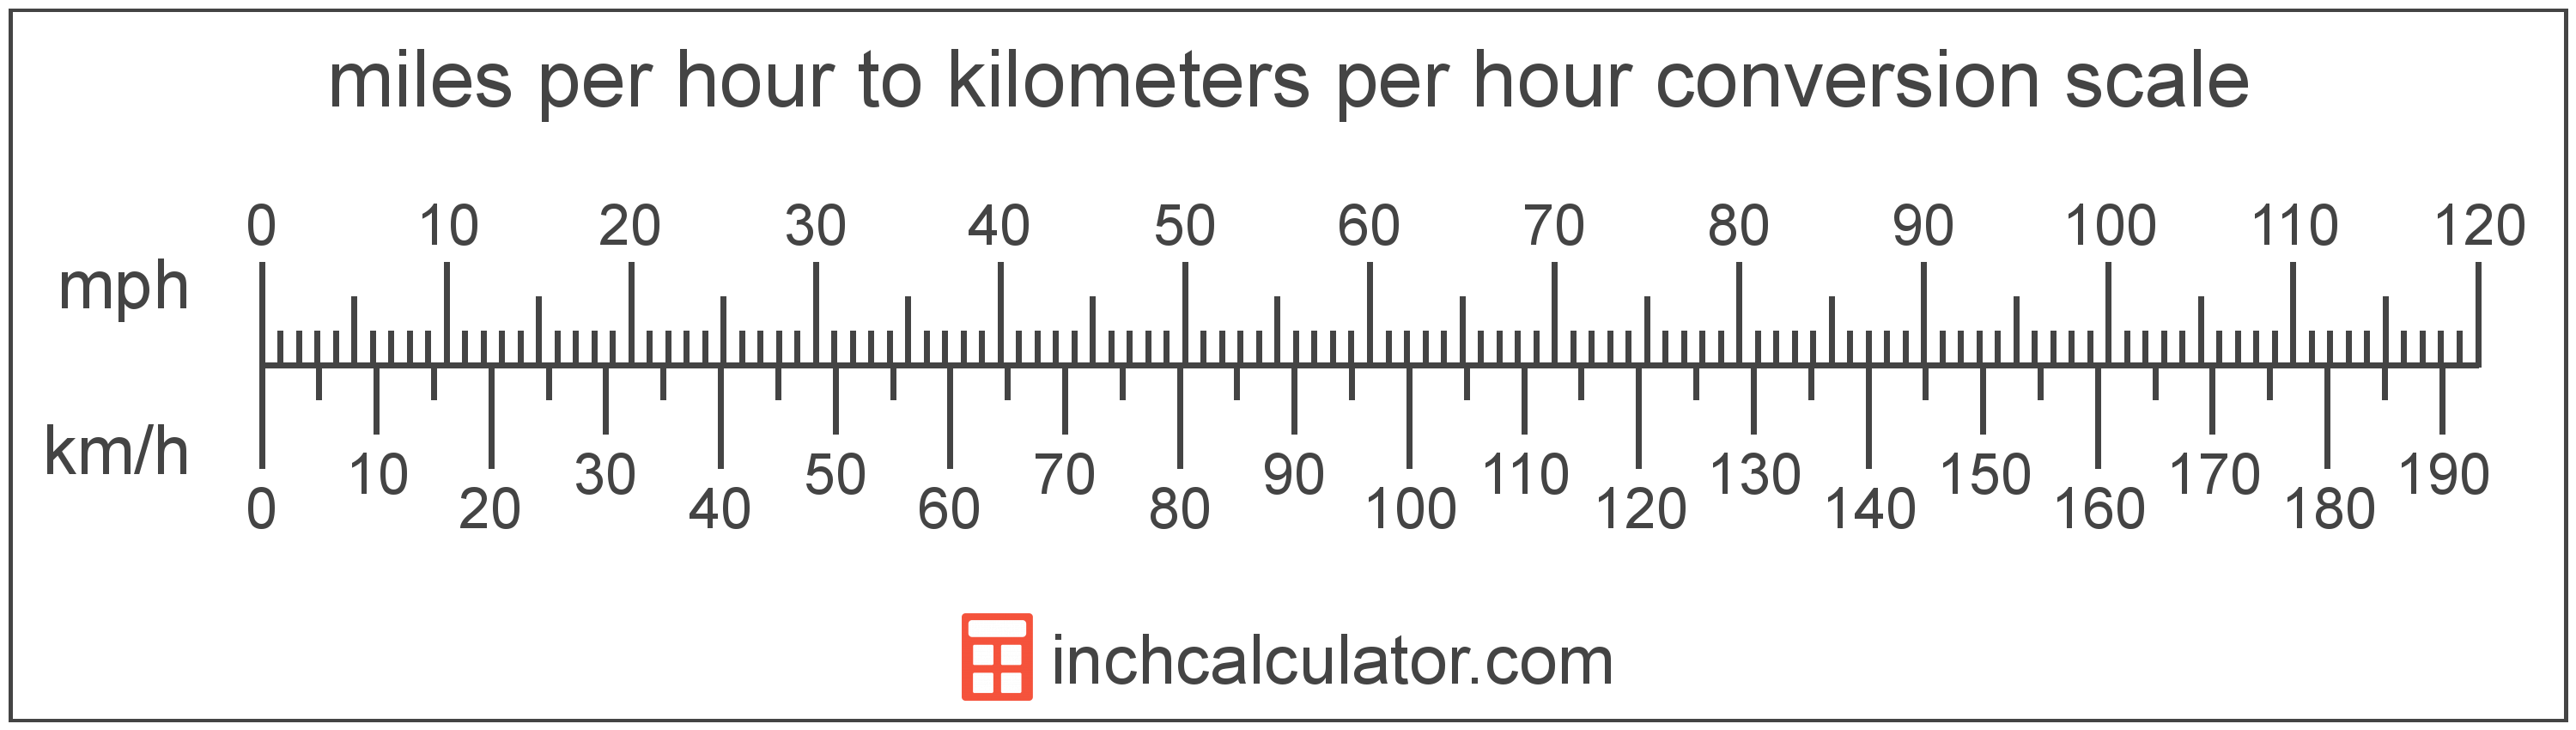 conversion scale showing miles per hour and equivalent kilometers per hour speed values